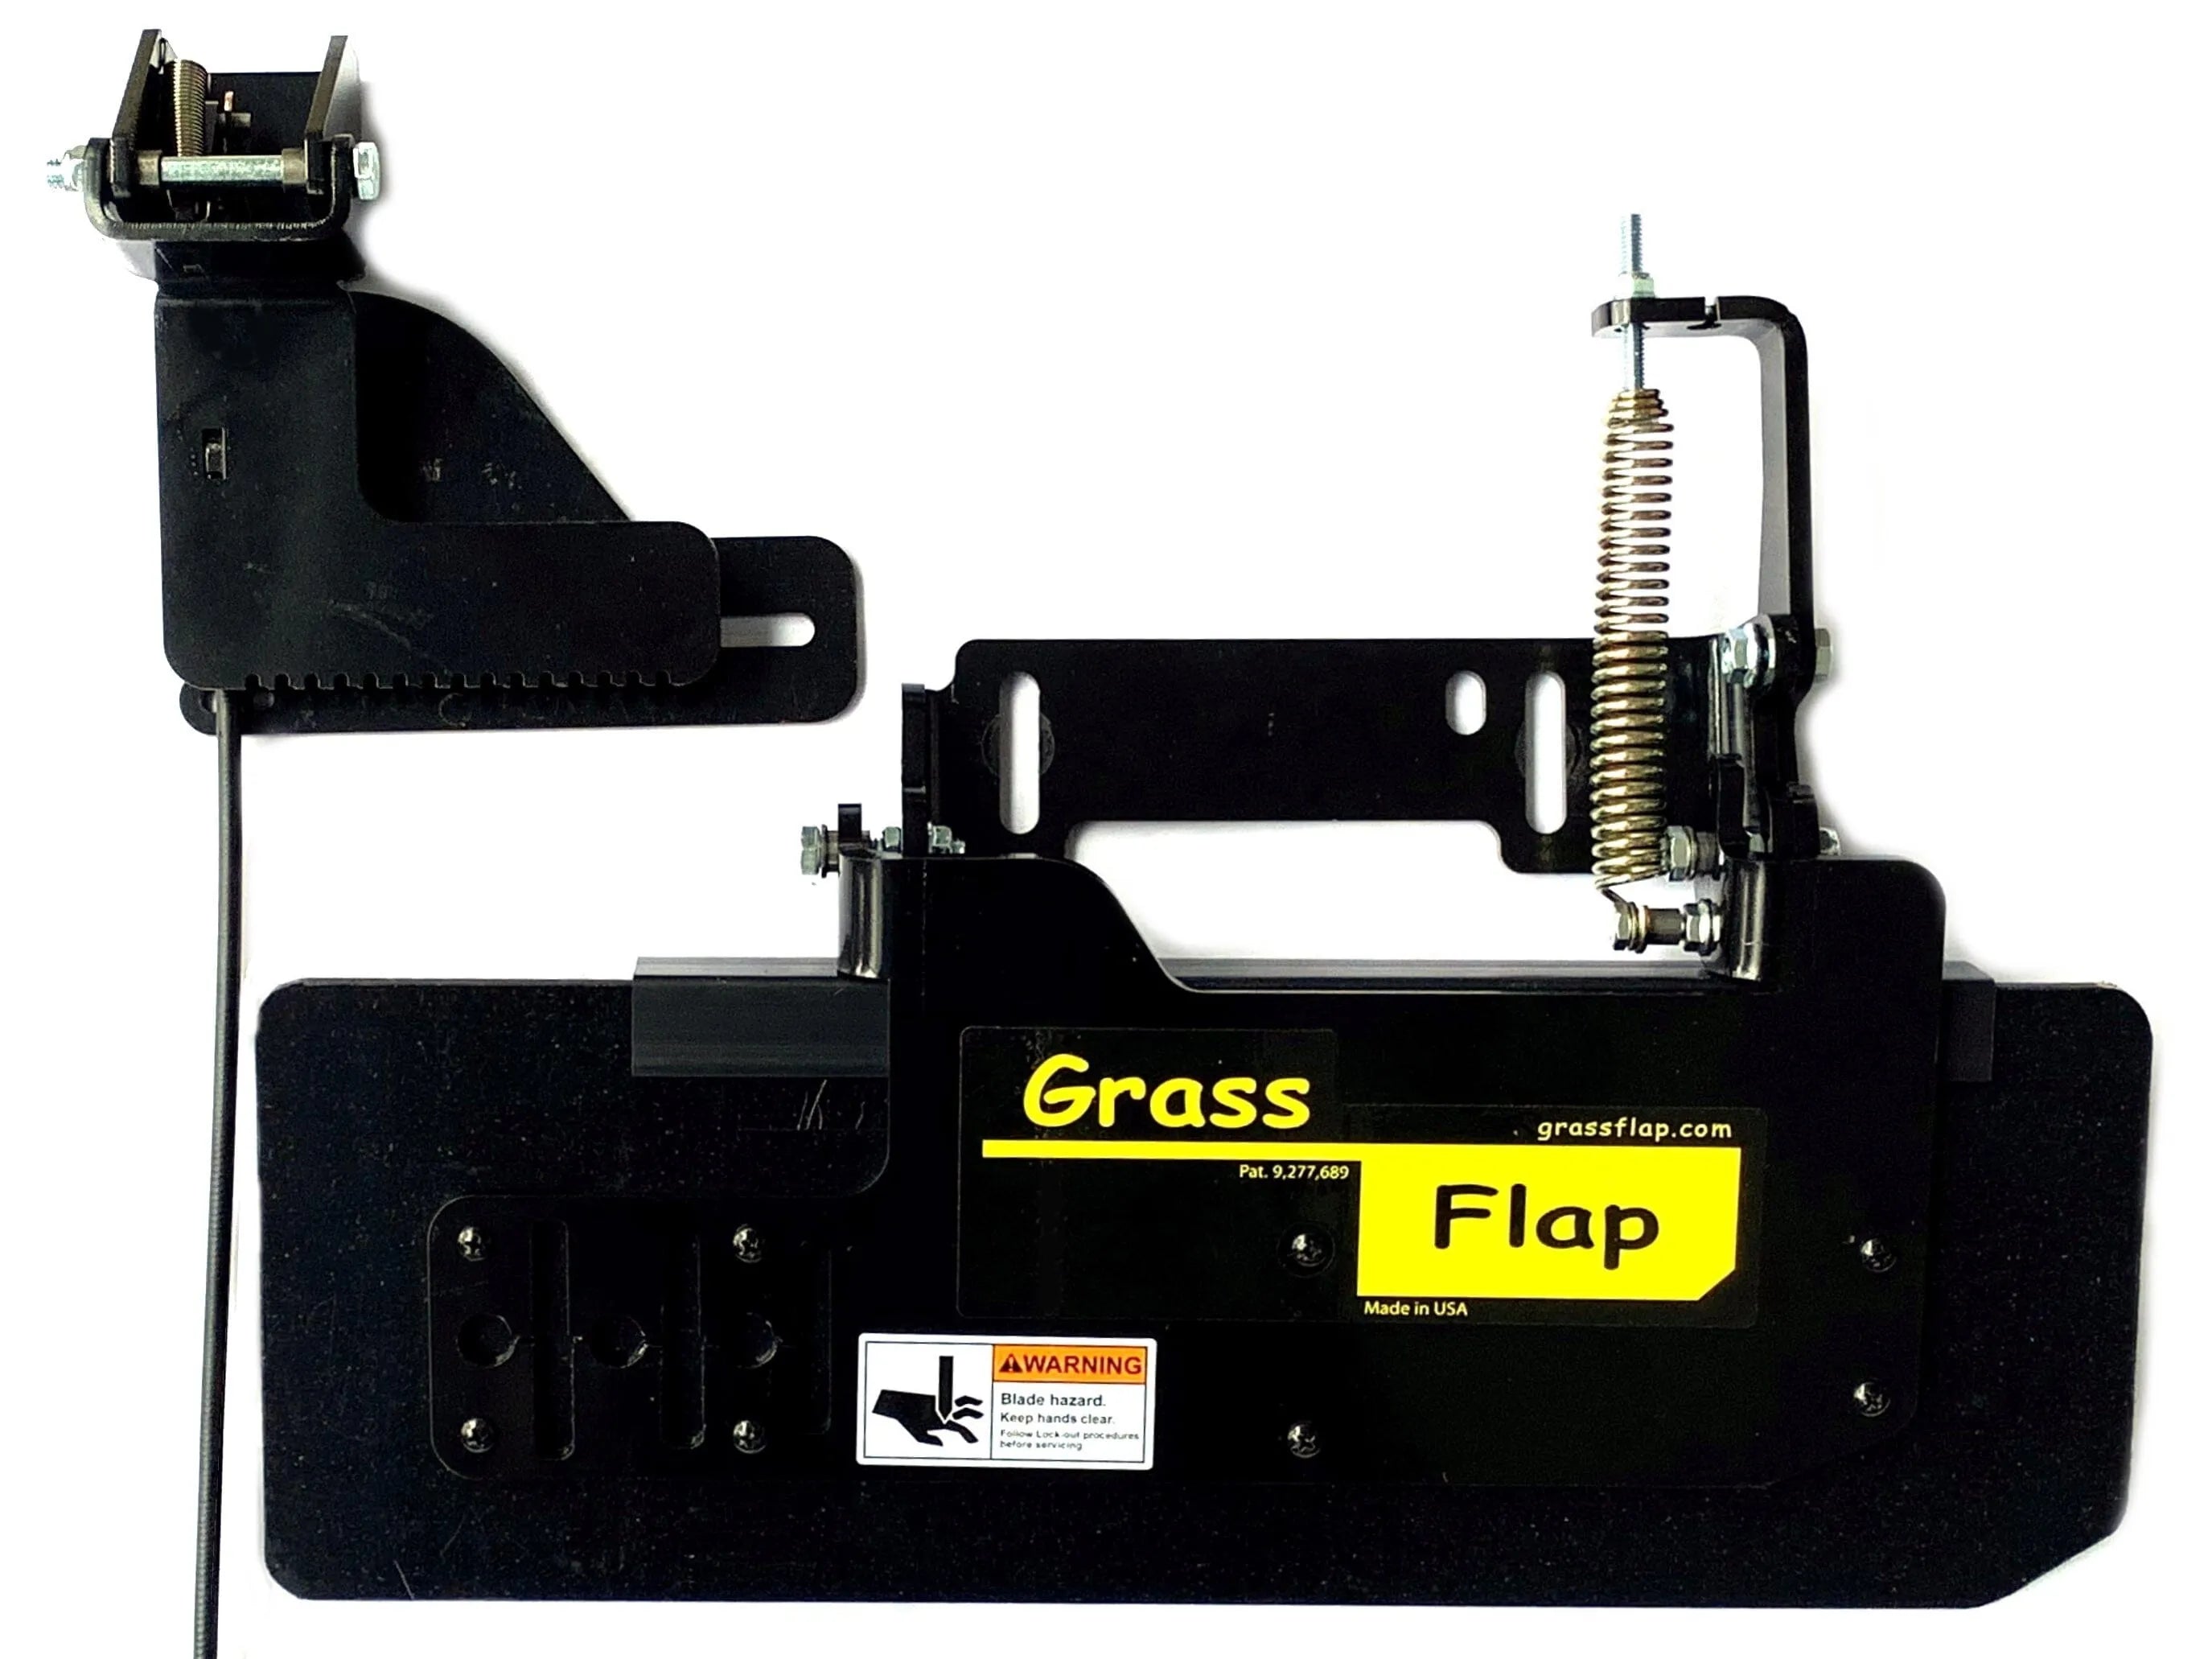 44P50-5L-A18 Low Profile Heavy-Duty GrassFlap Pedal SEL with Includes